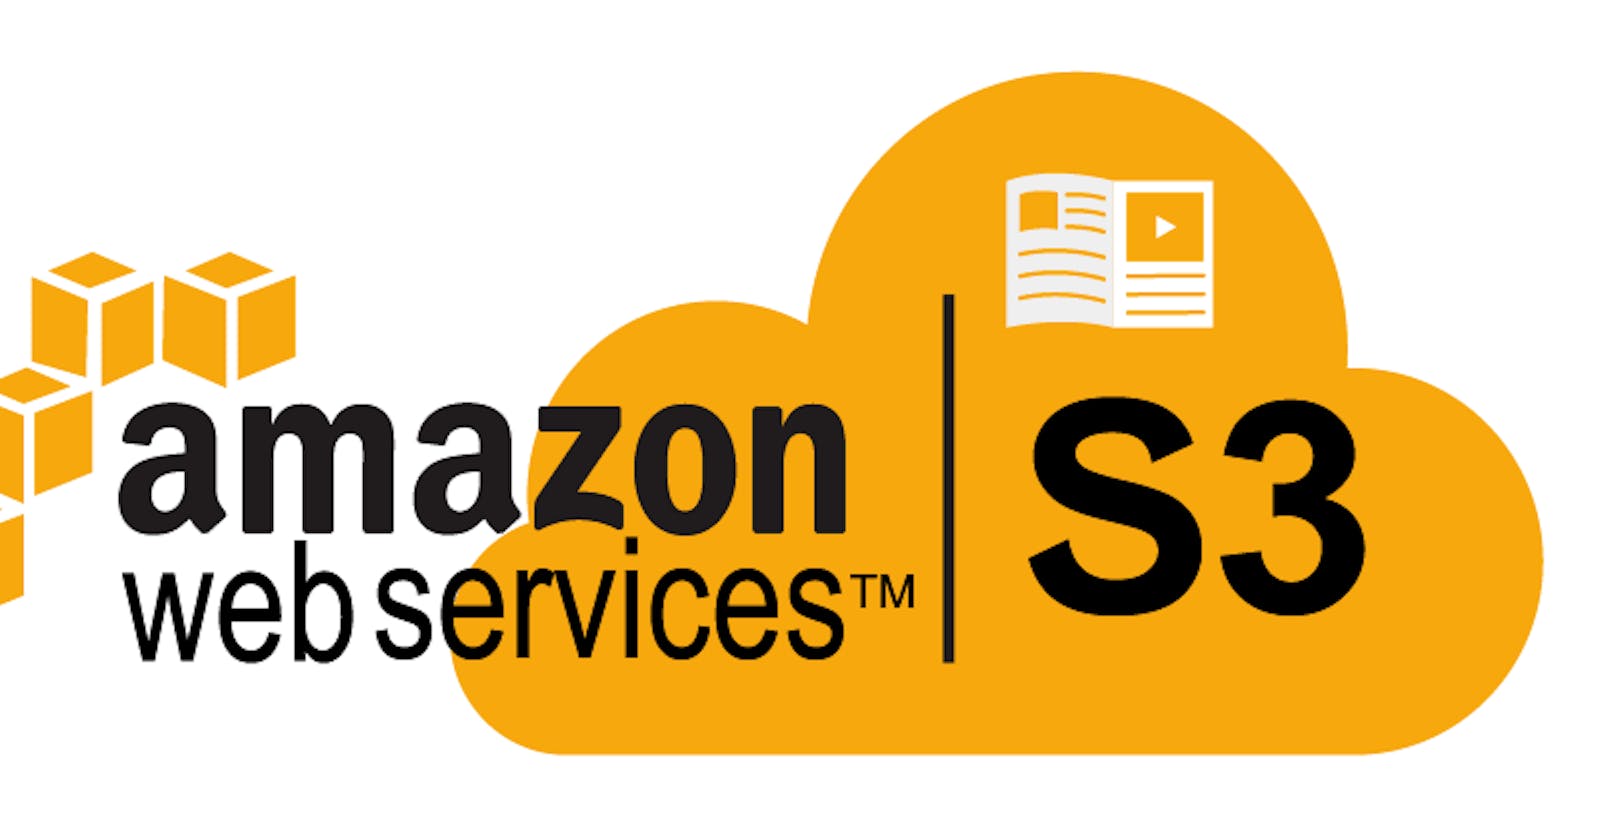 Hosting a static website on an Amazon S3 bucket in the cloud